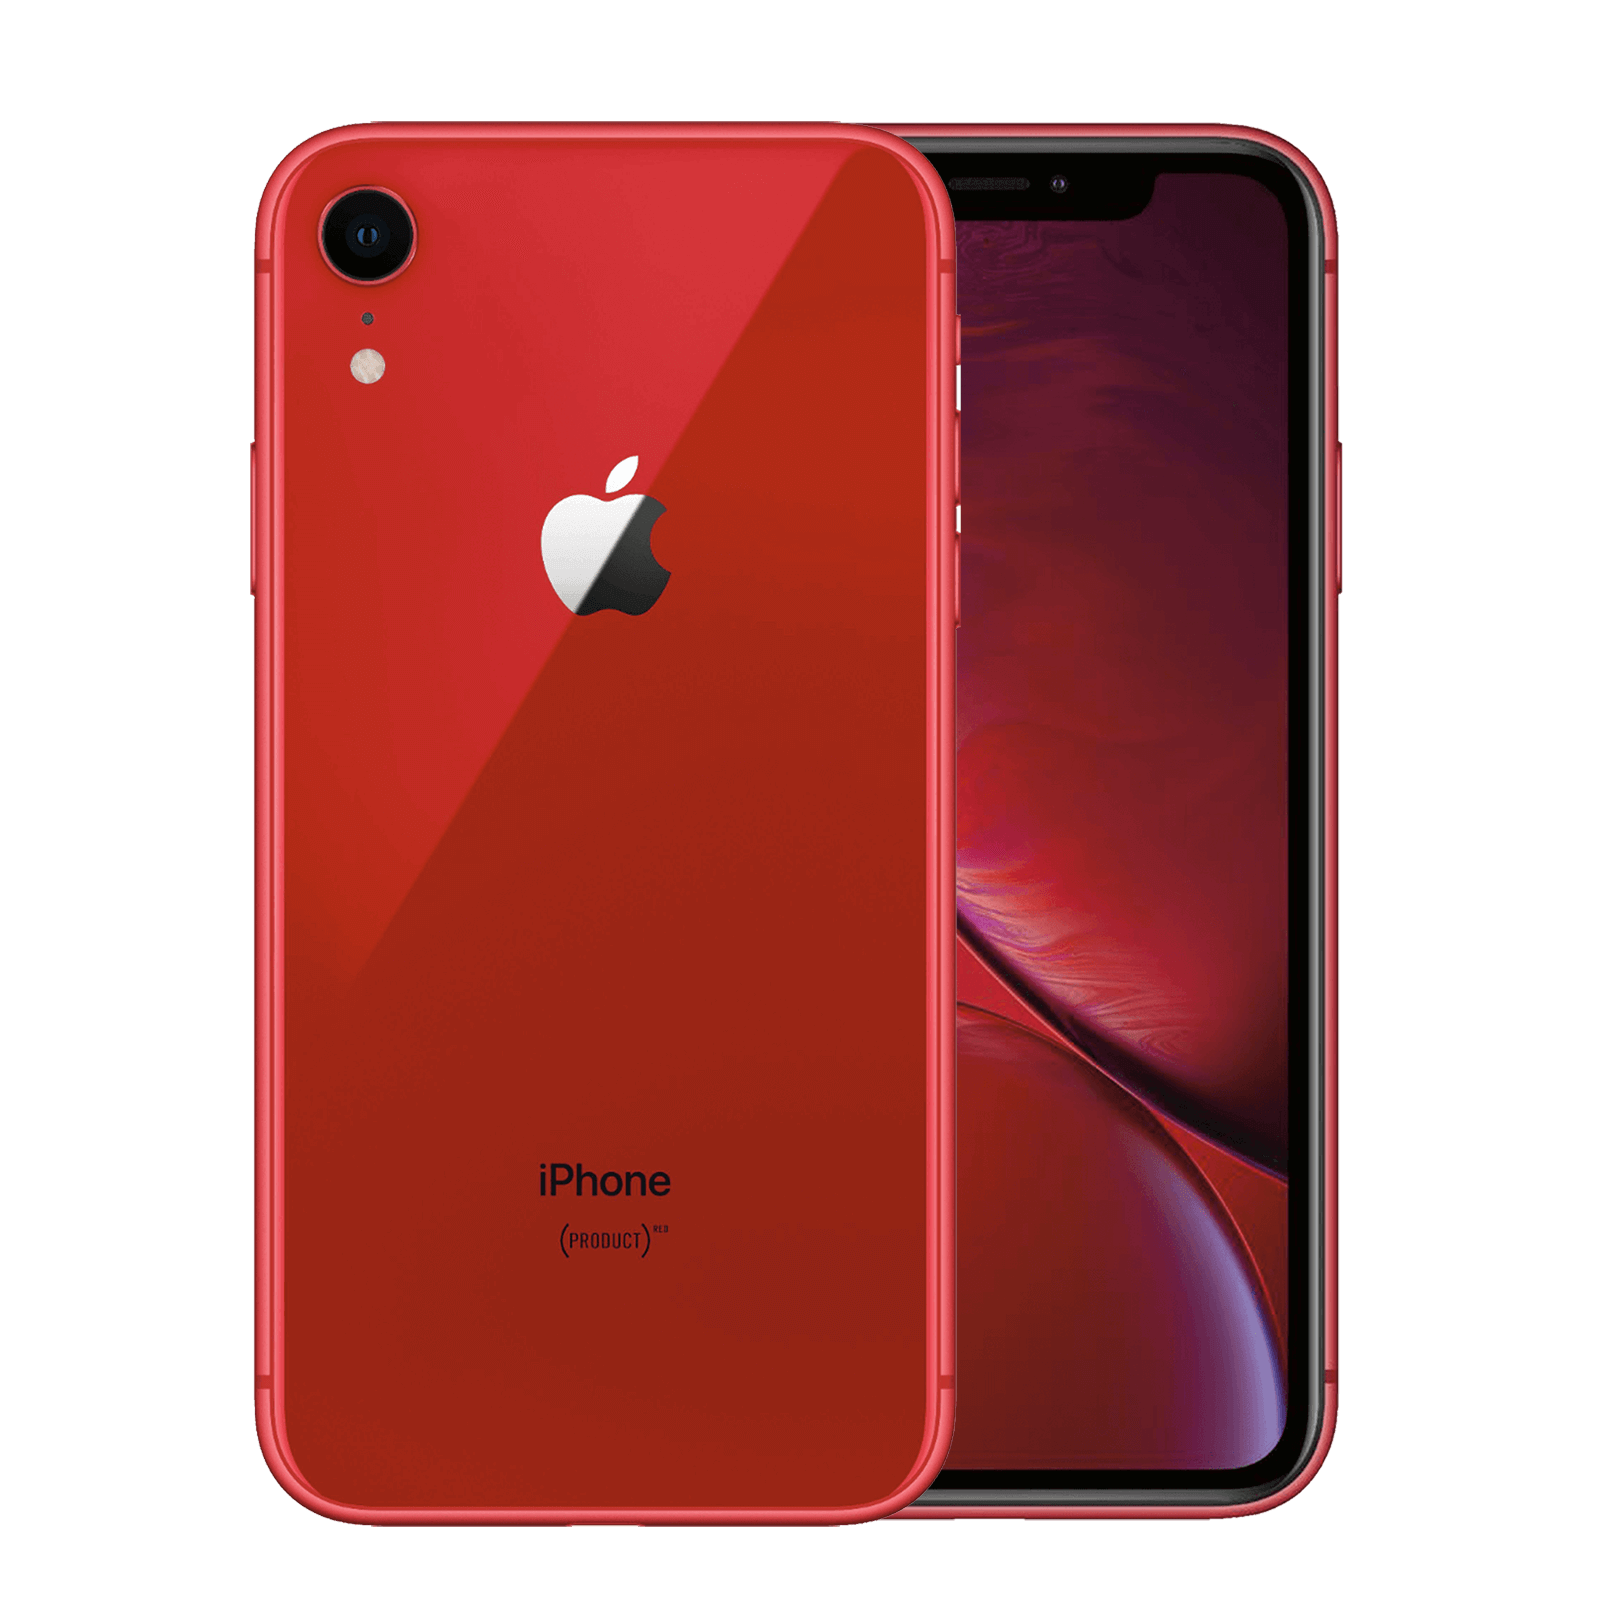 Apple iPhone XR 64GB Product Red Good - AT&T